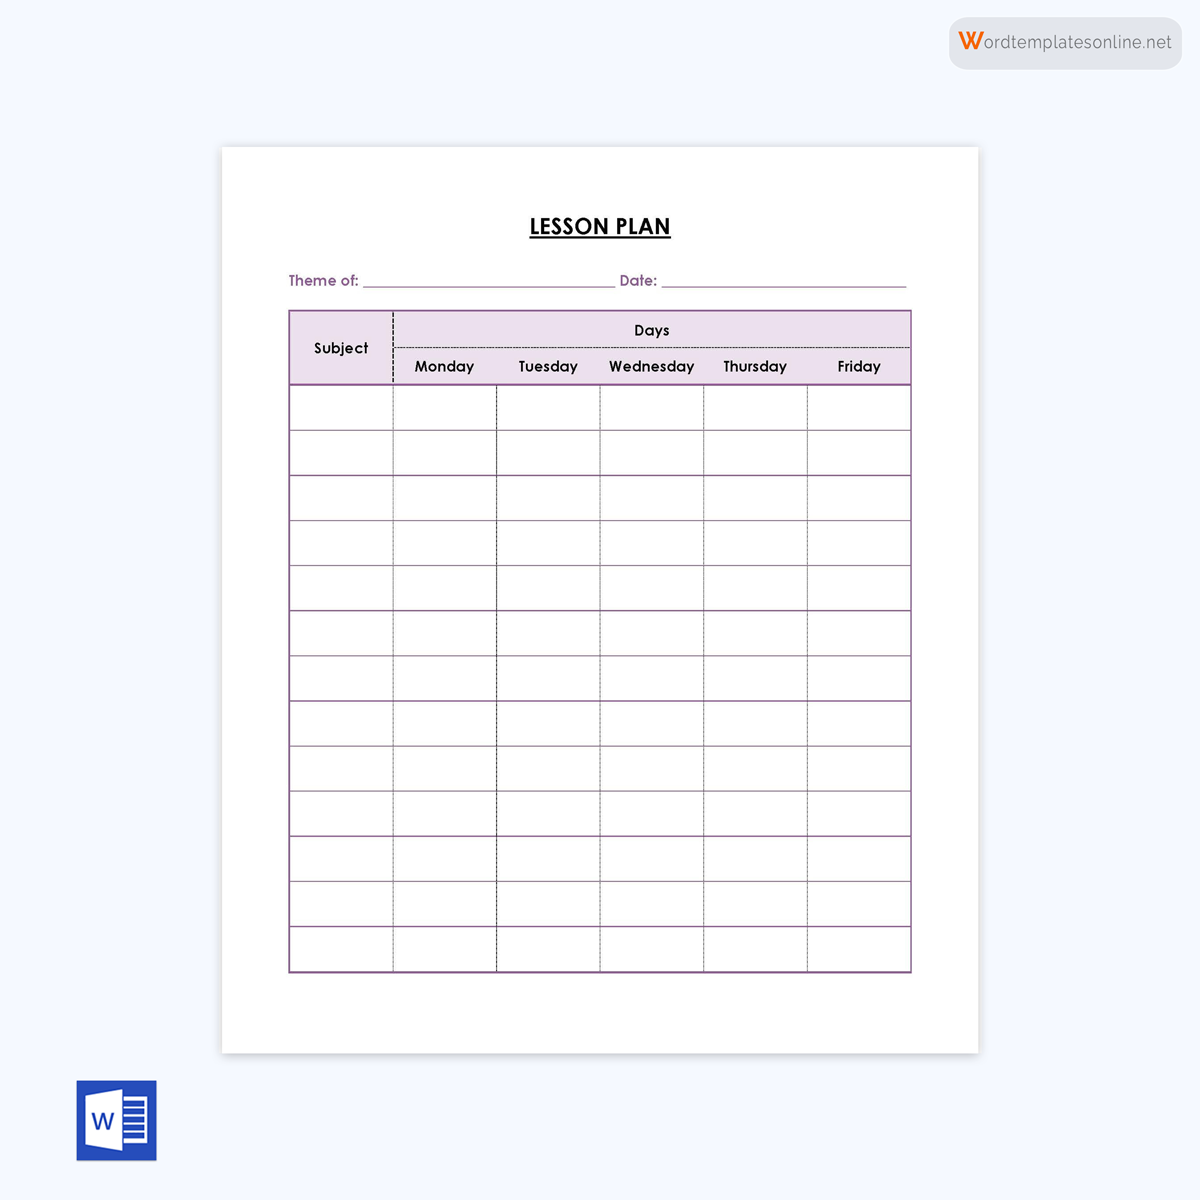 Free Weekly Lesson Plan Template 05 for Word File